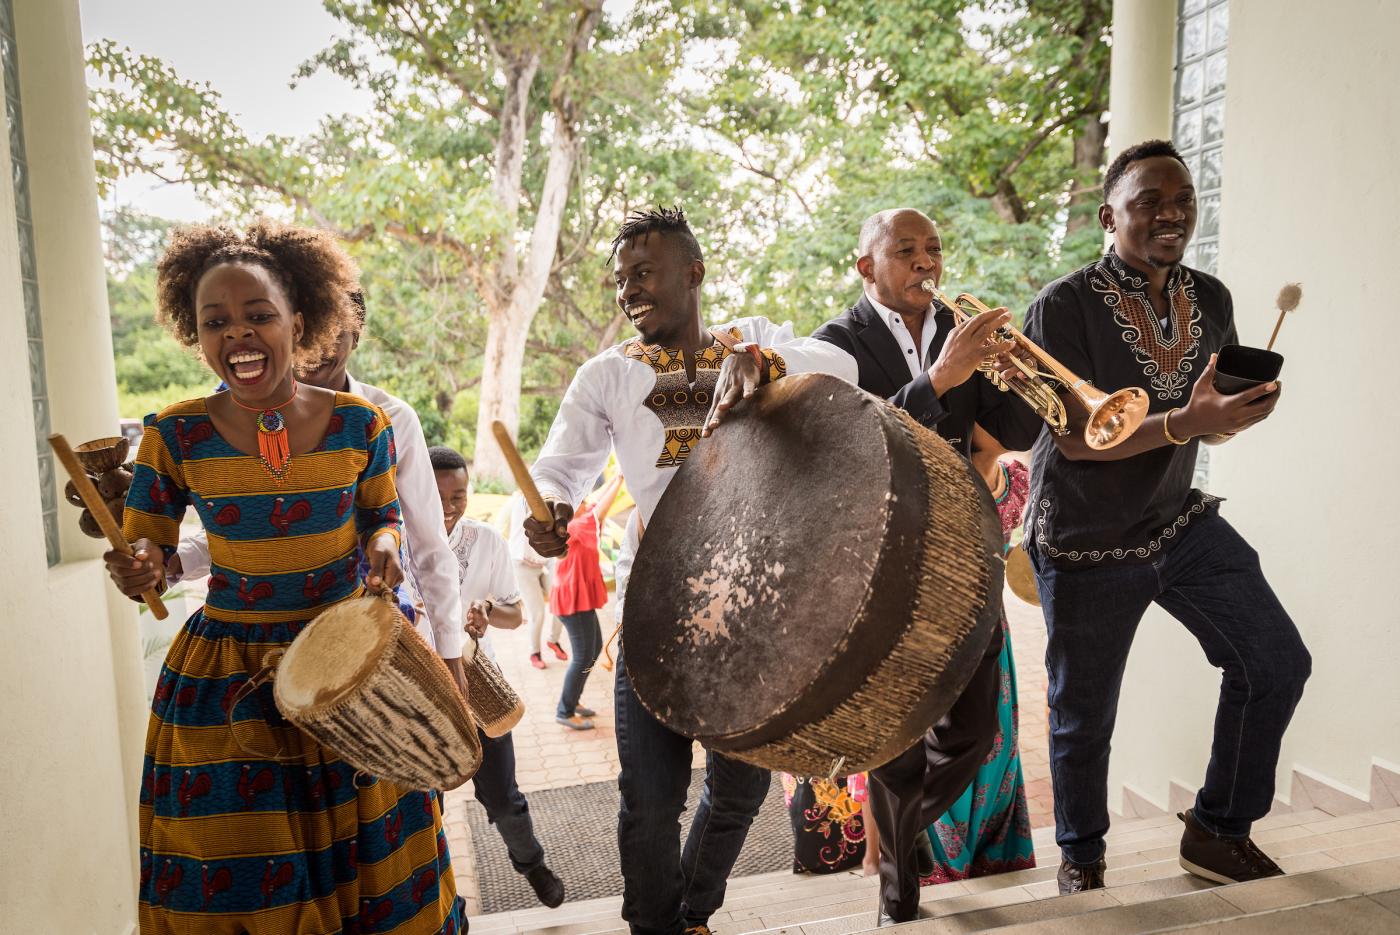 young people play drums and trumpet during one of the sessions of the Global Ecumenical Theological Institute (GETI) in Arusha, Tanzania, 2018.